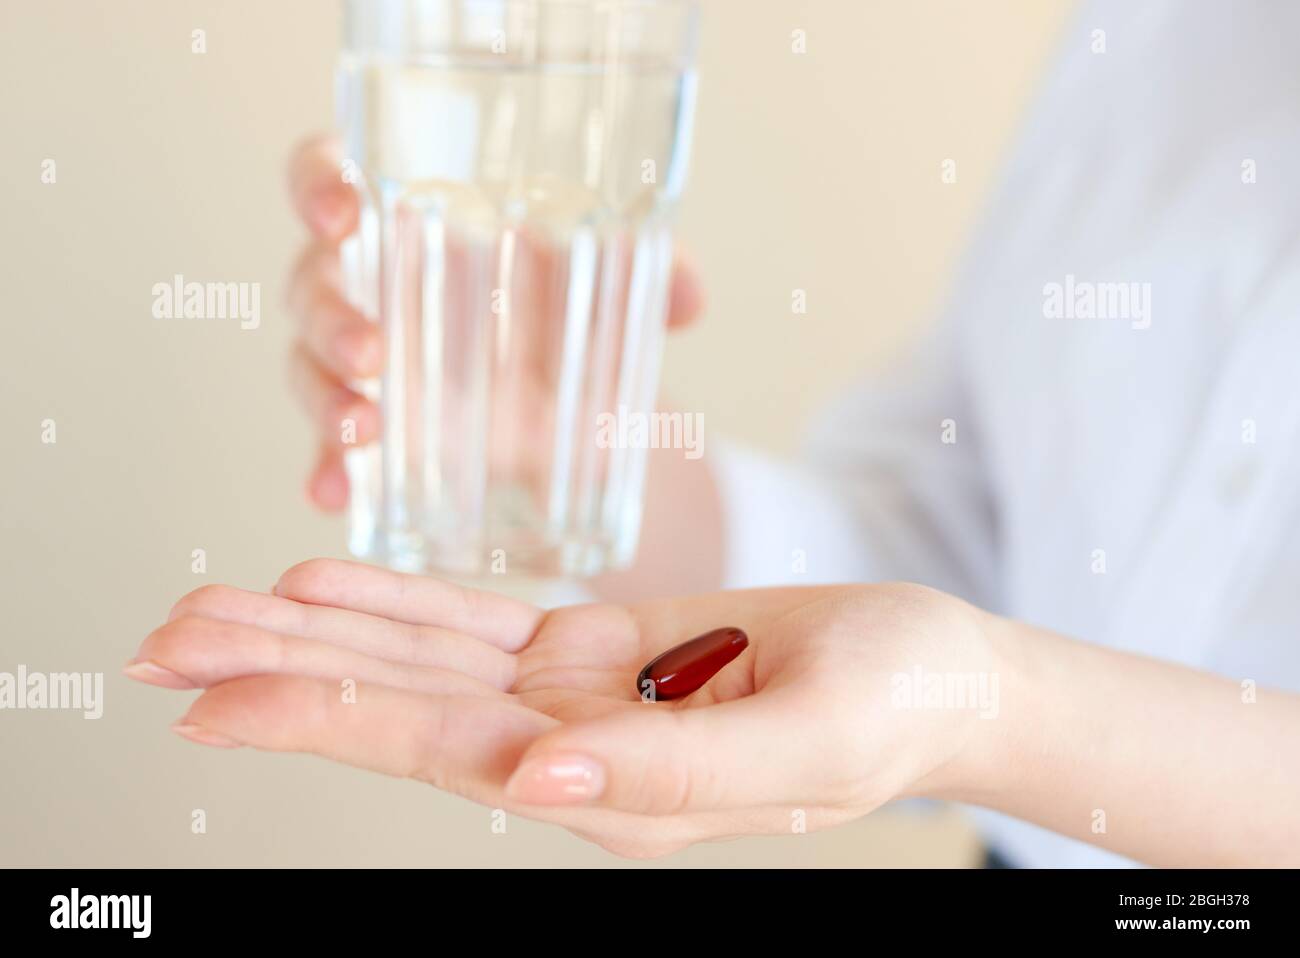 Healthcare and medical concept. Close-up view of woman holding pill in one hand and glass of water in the another hand. Focus on the pill. Coronavirus Stock Photo